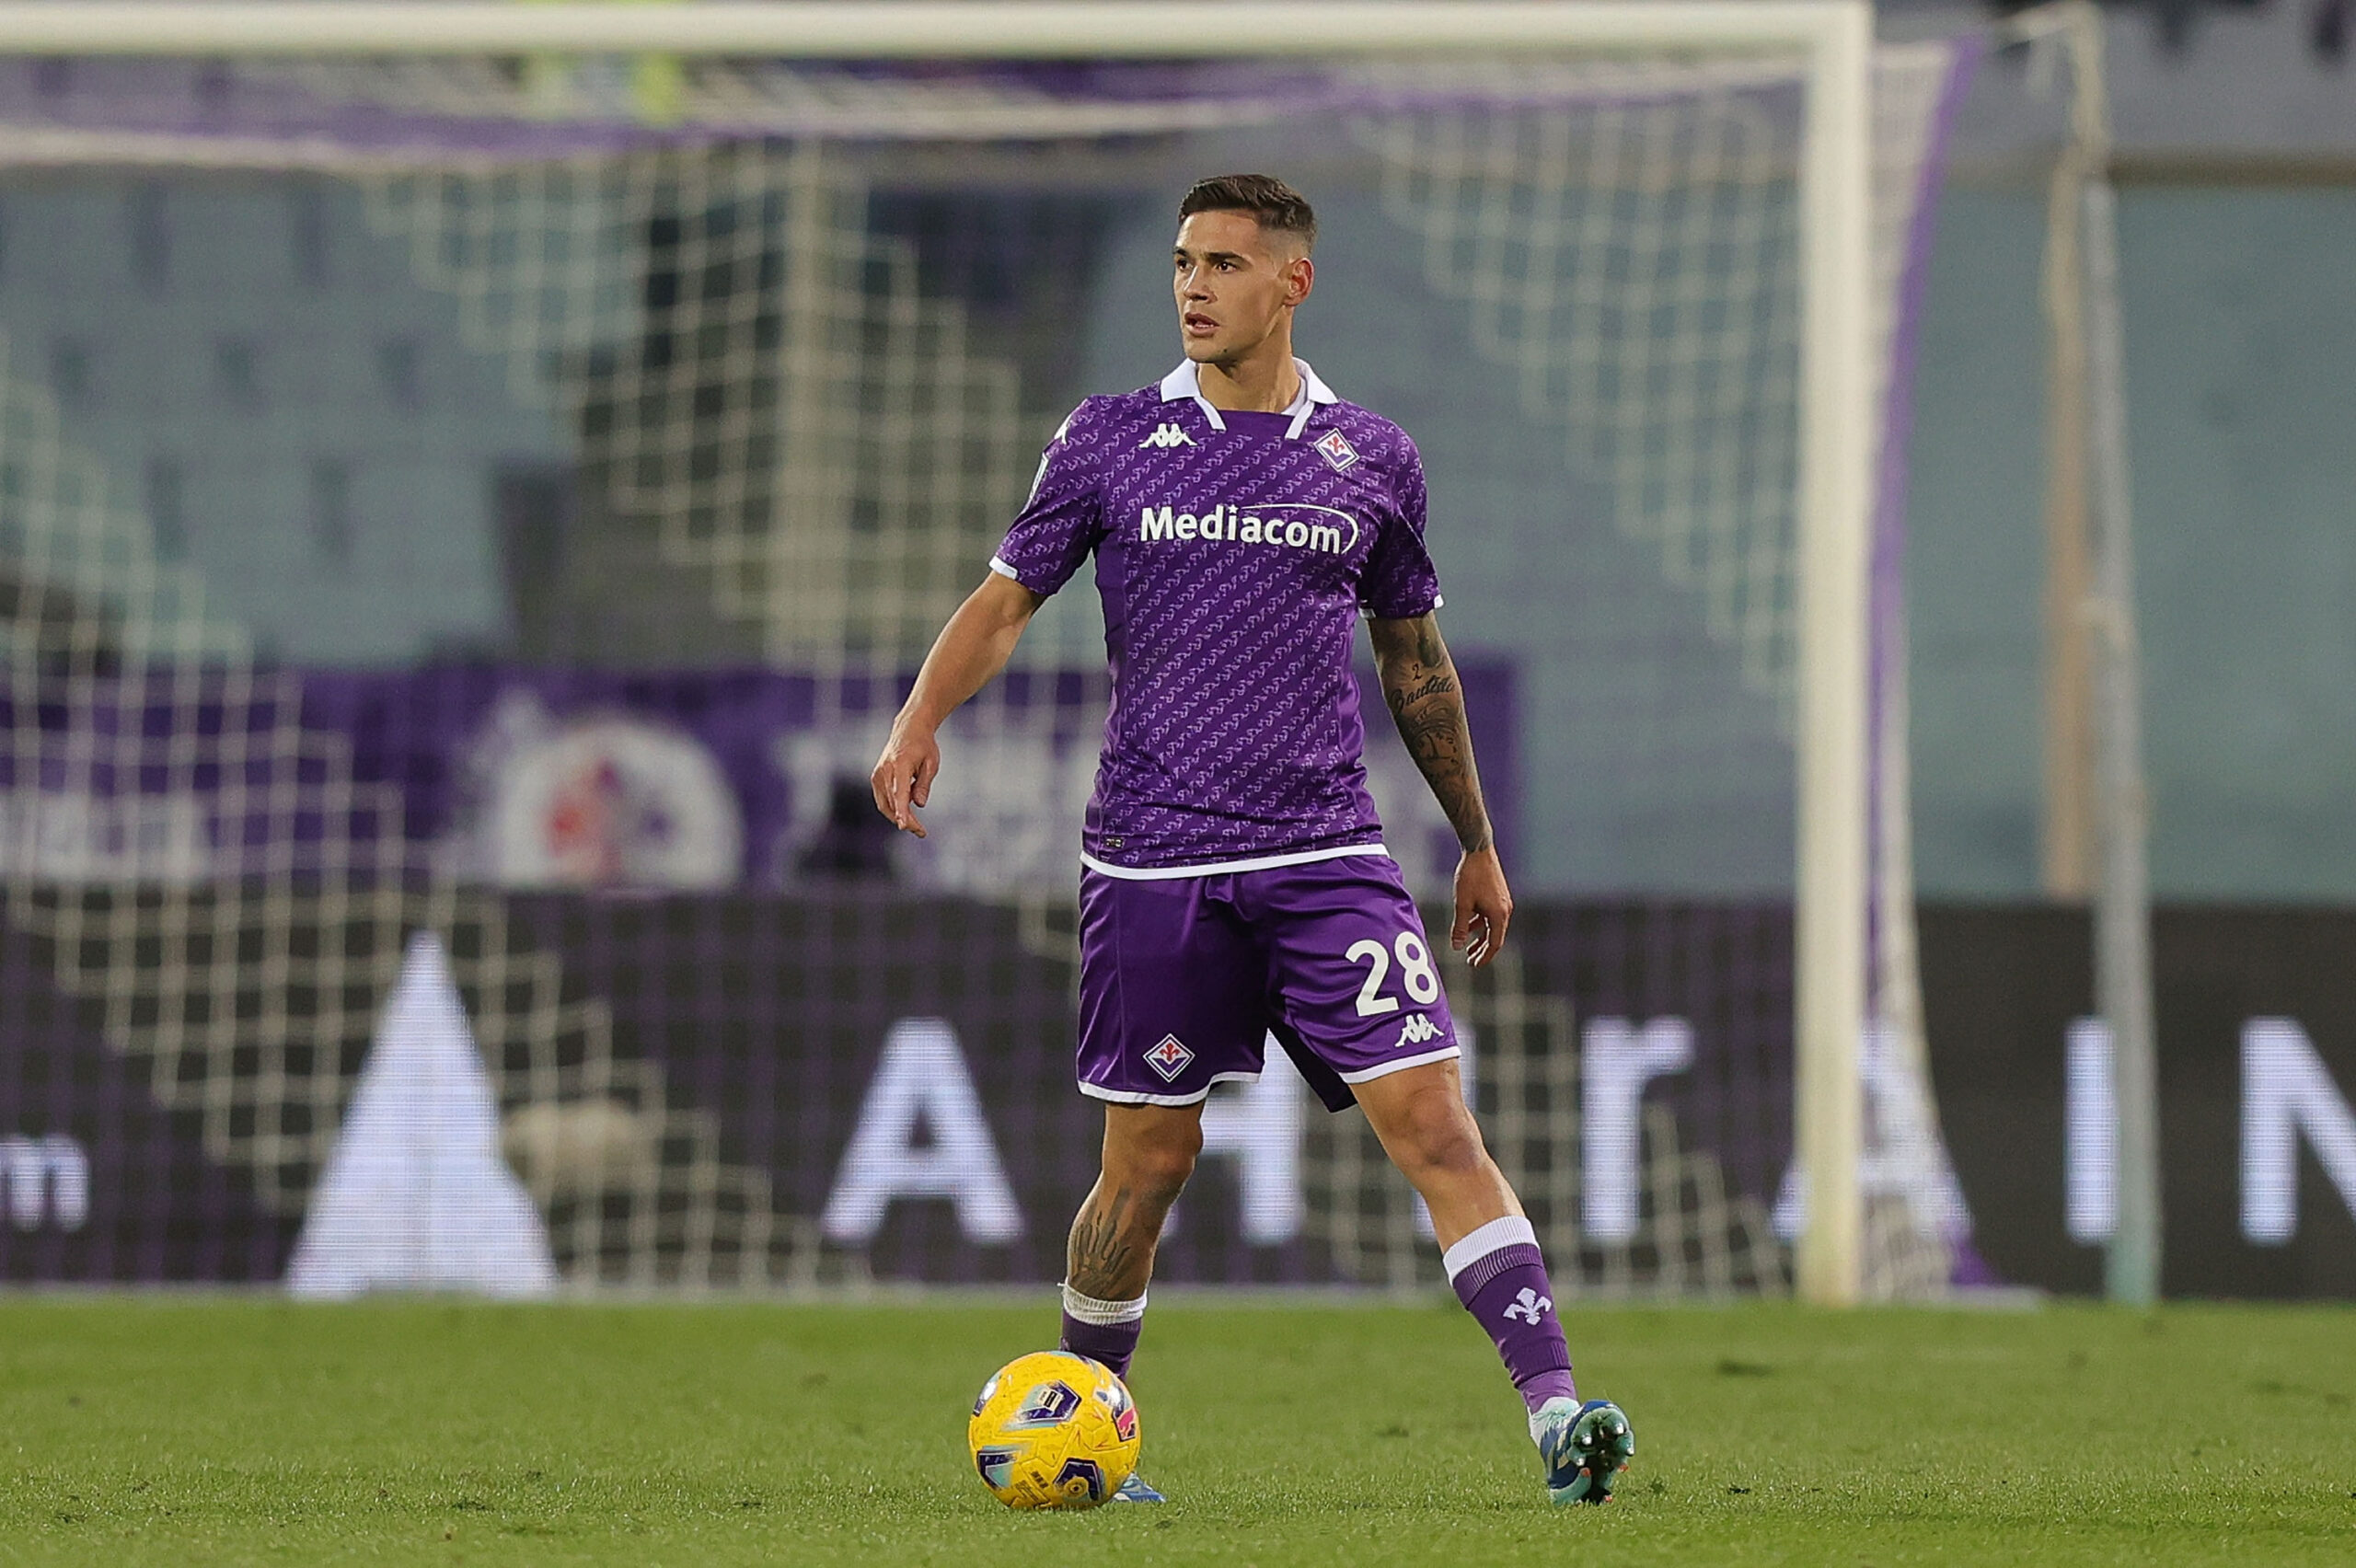 Fiorentina and Martinez Quarta are struggling to come to terms on an extension, and Juventus are monitoring the situation.